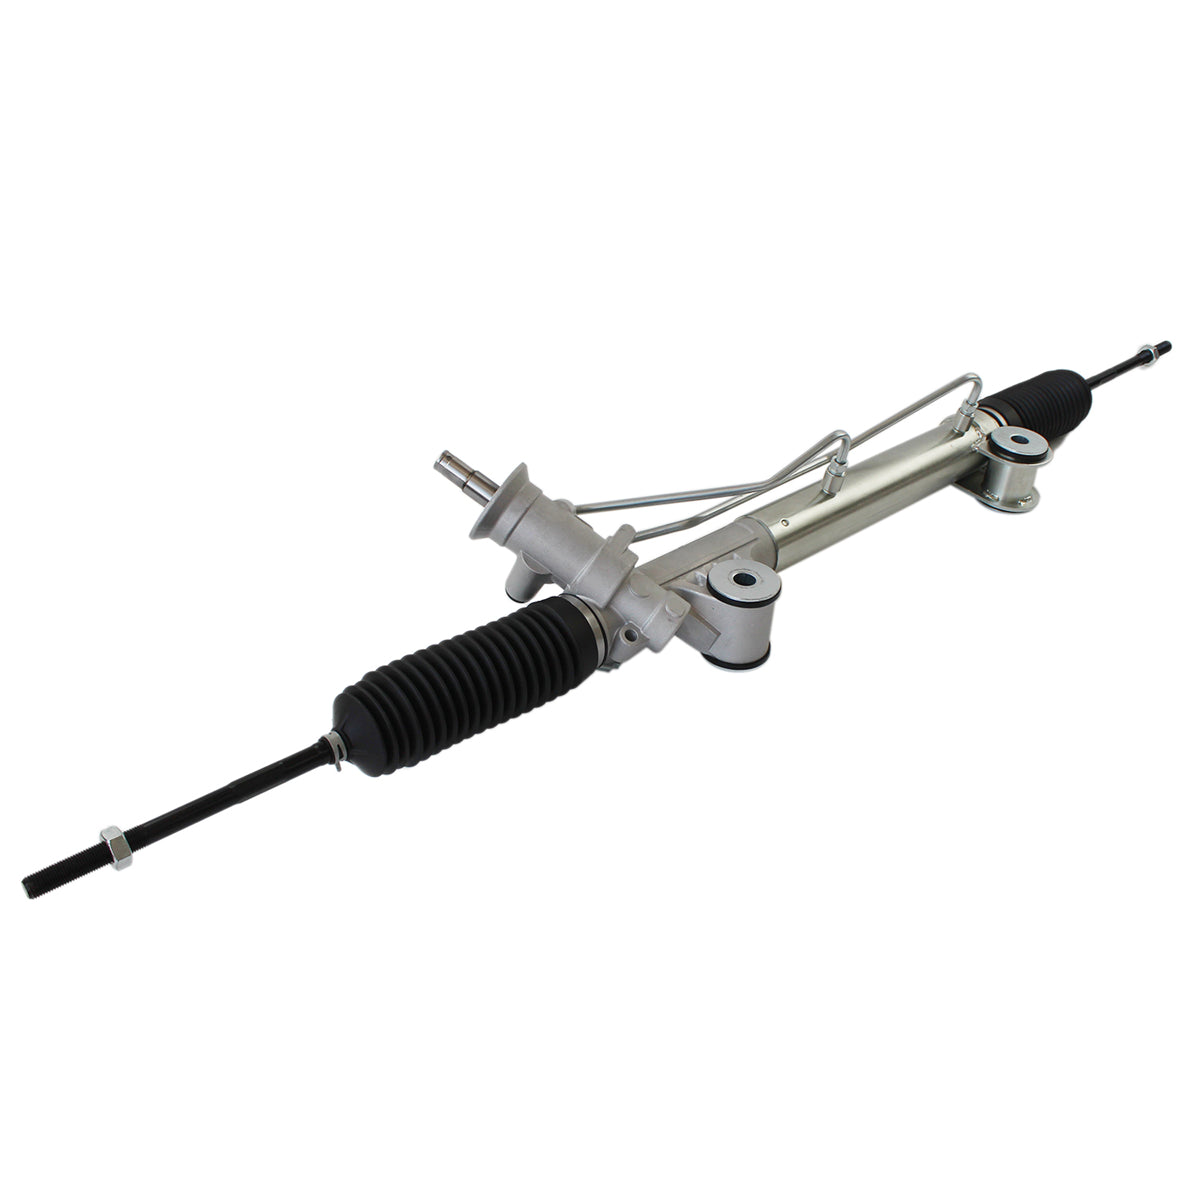 Daysyore® Power Steering Rack and Pinion for Chevy Silverado GMC Sierra 1500 1999-2006 2WD 22-1000